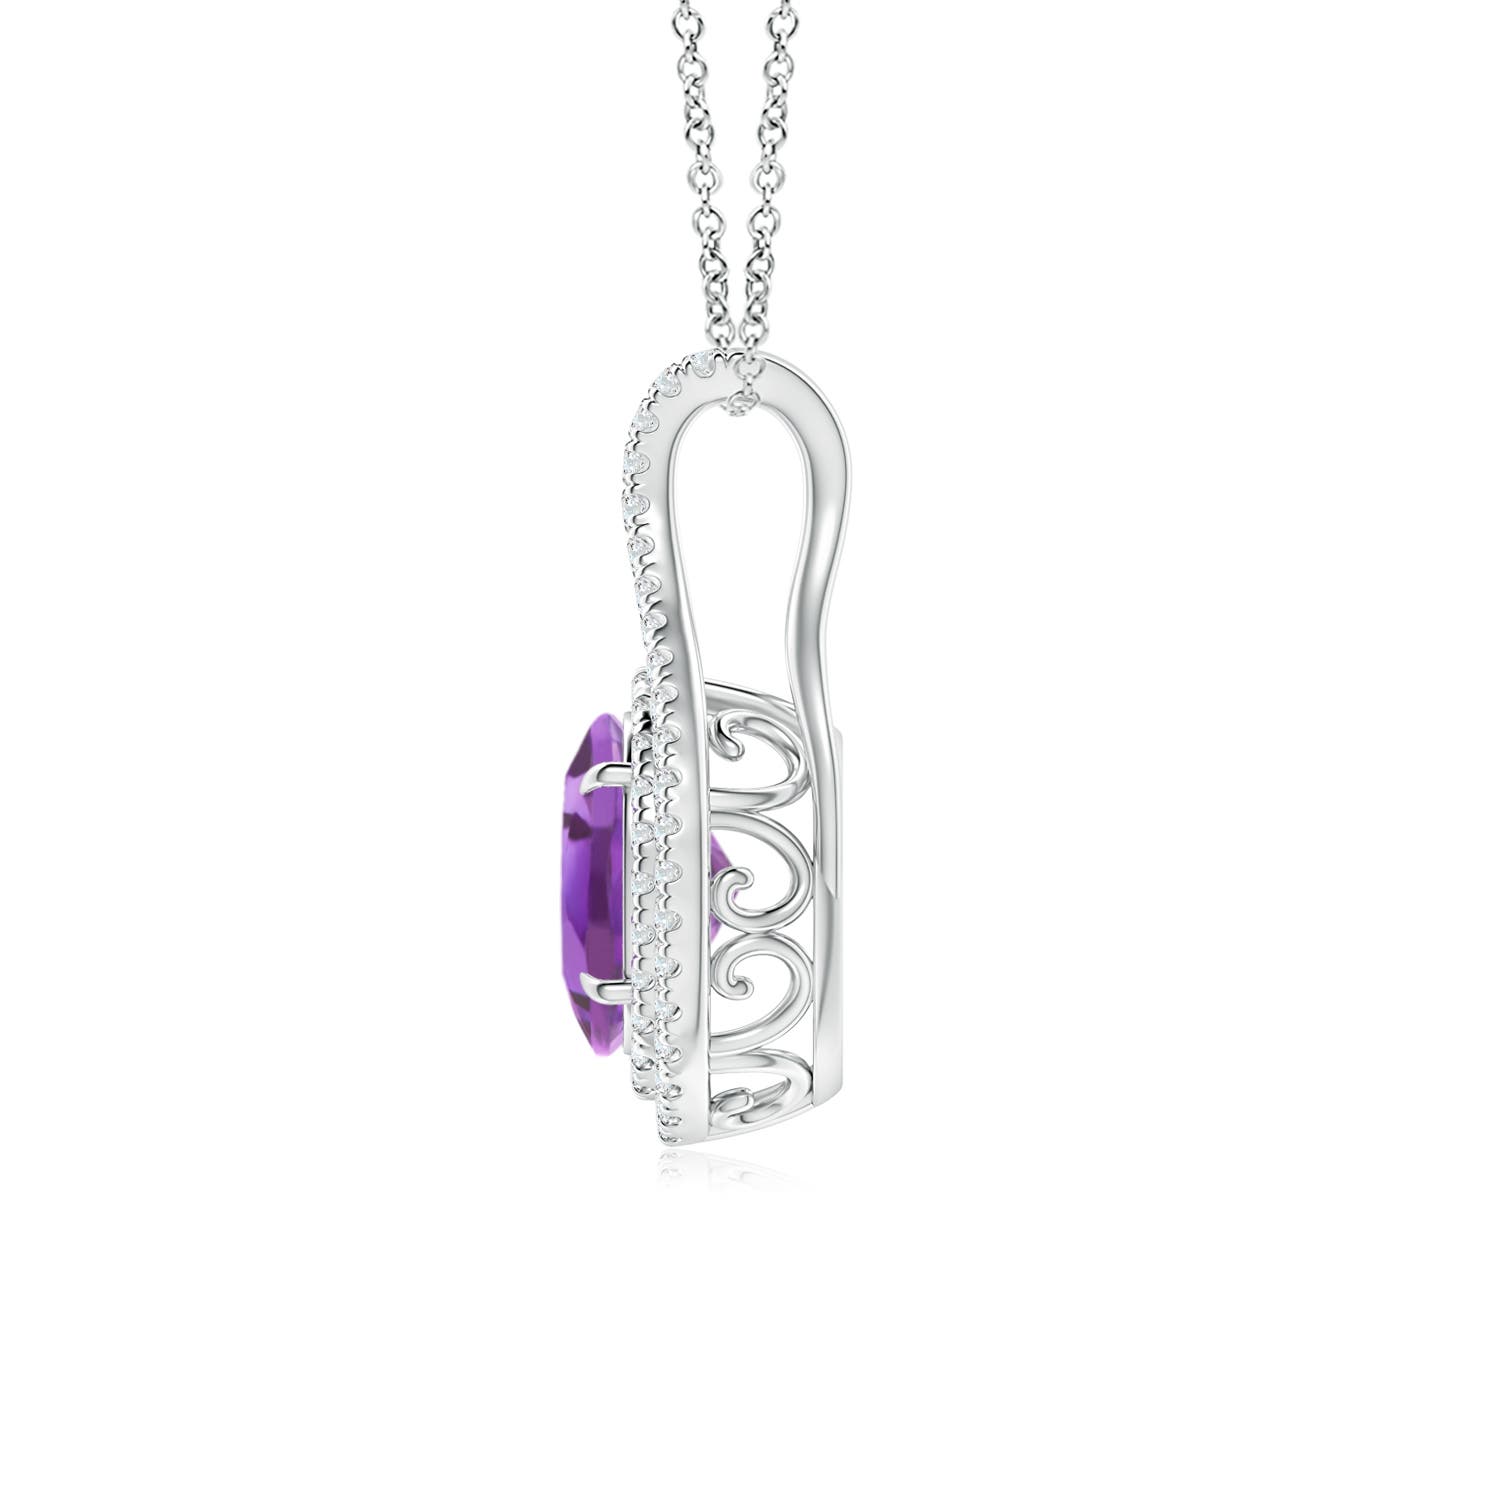 A - Amethyst / 1.45 CT / 14 KT White Gold